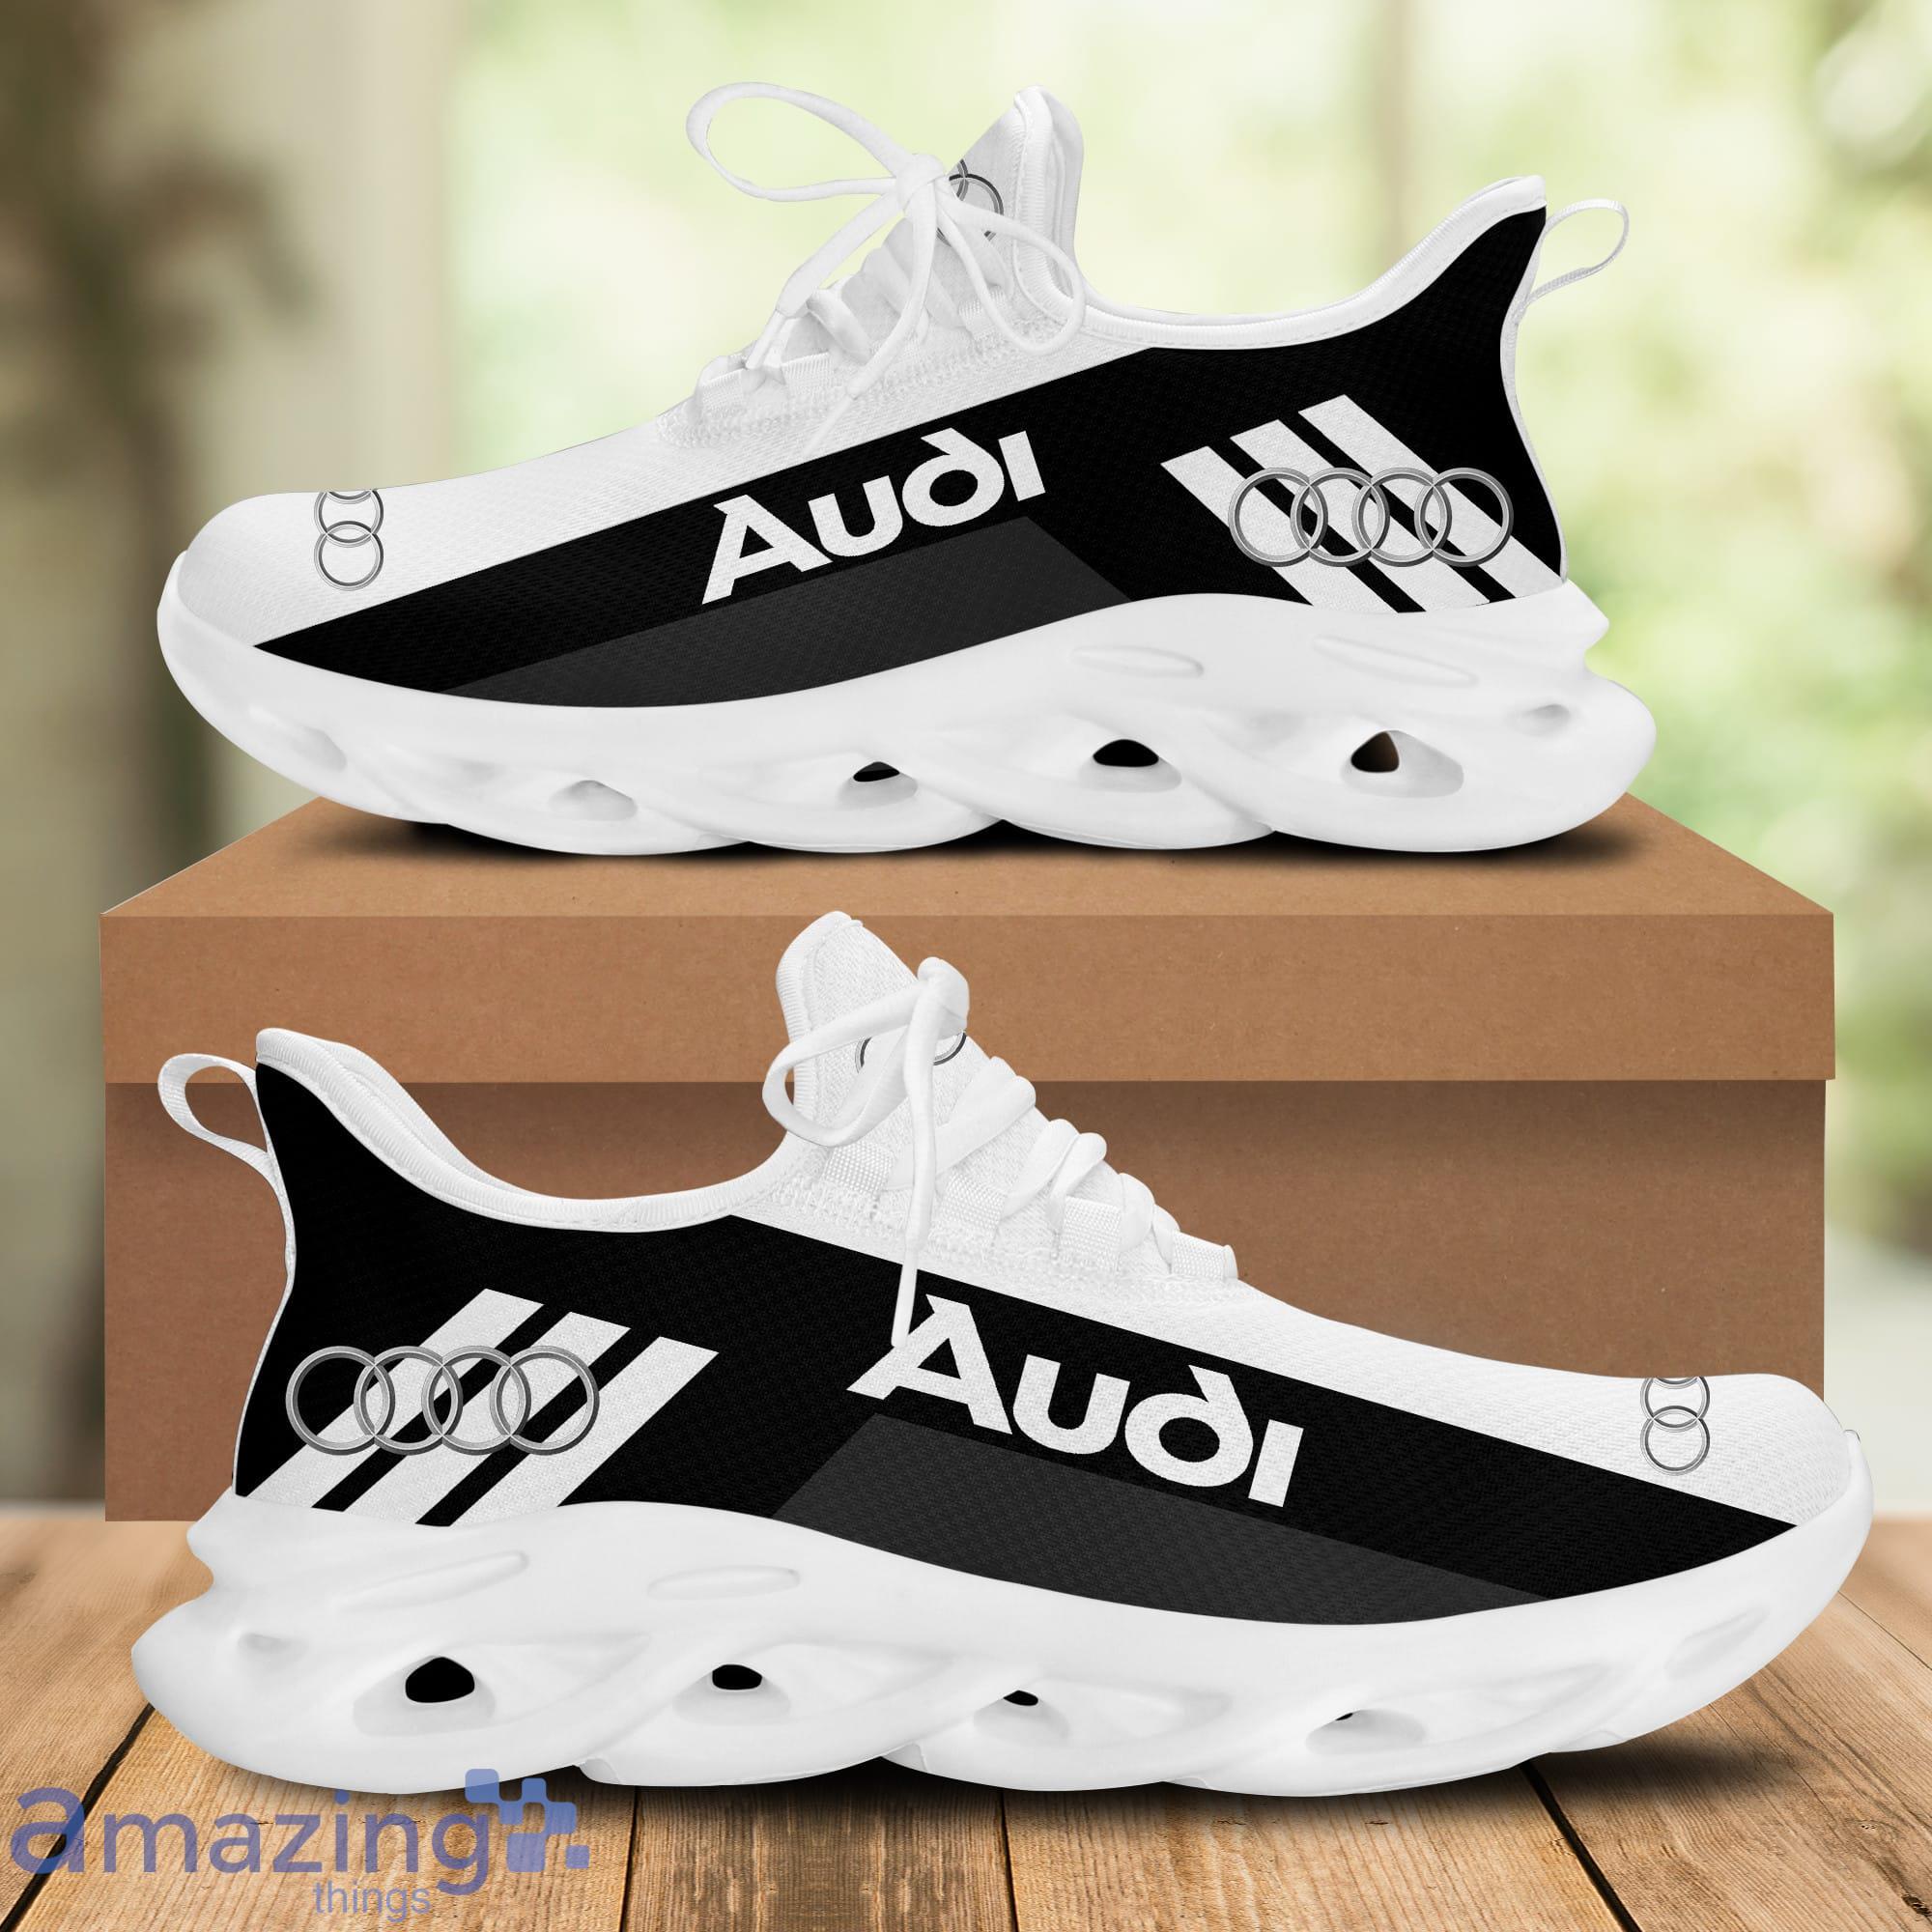 Audi Sport Men And Women Running Sneakers Ver 41 White Striped Max